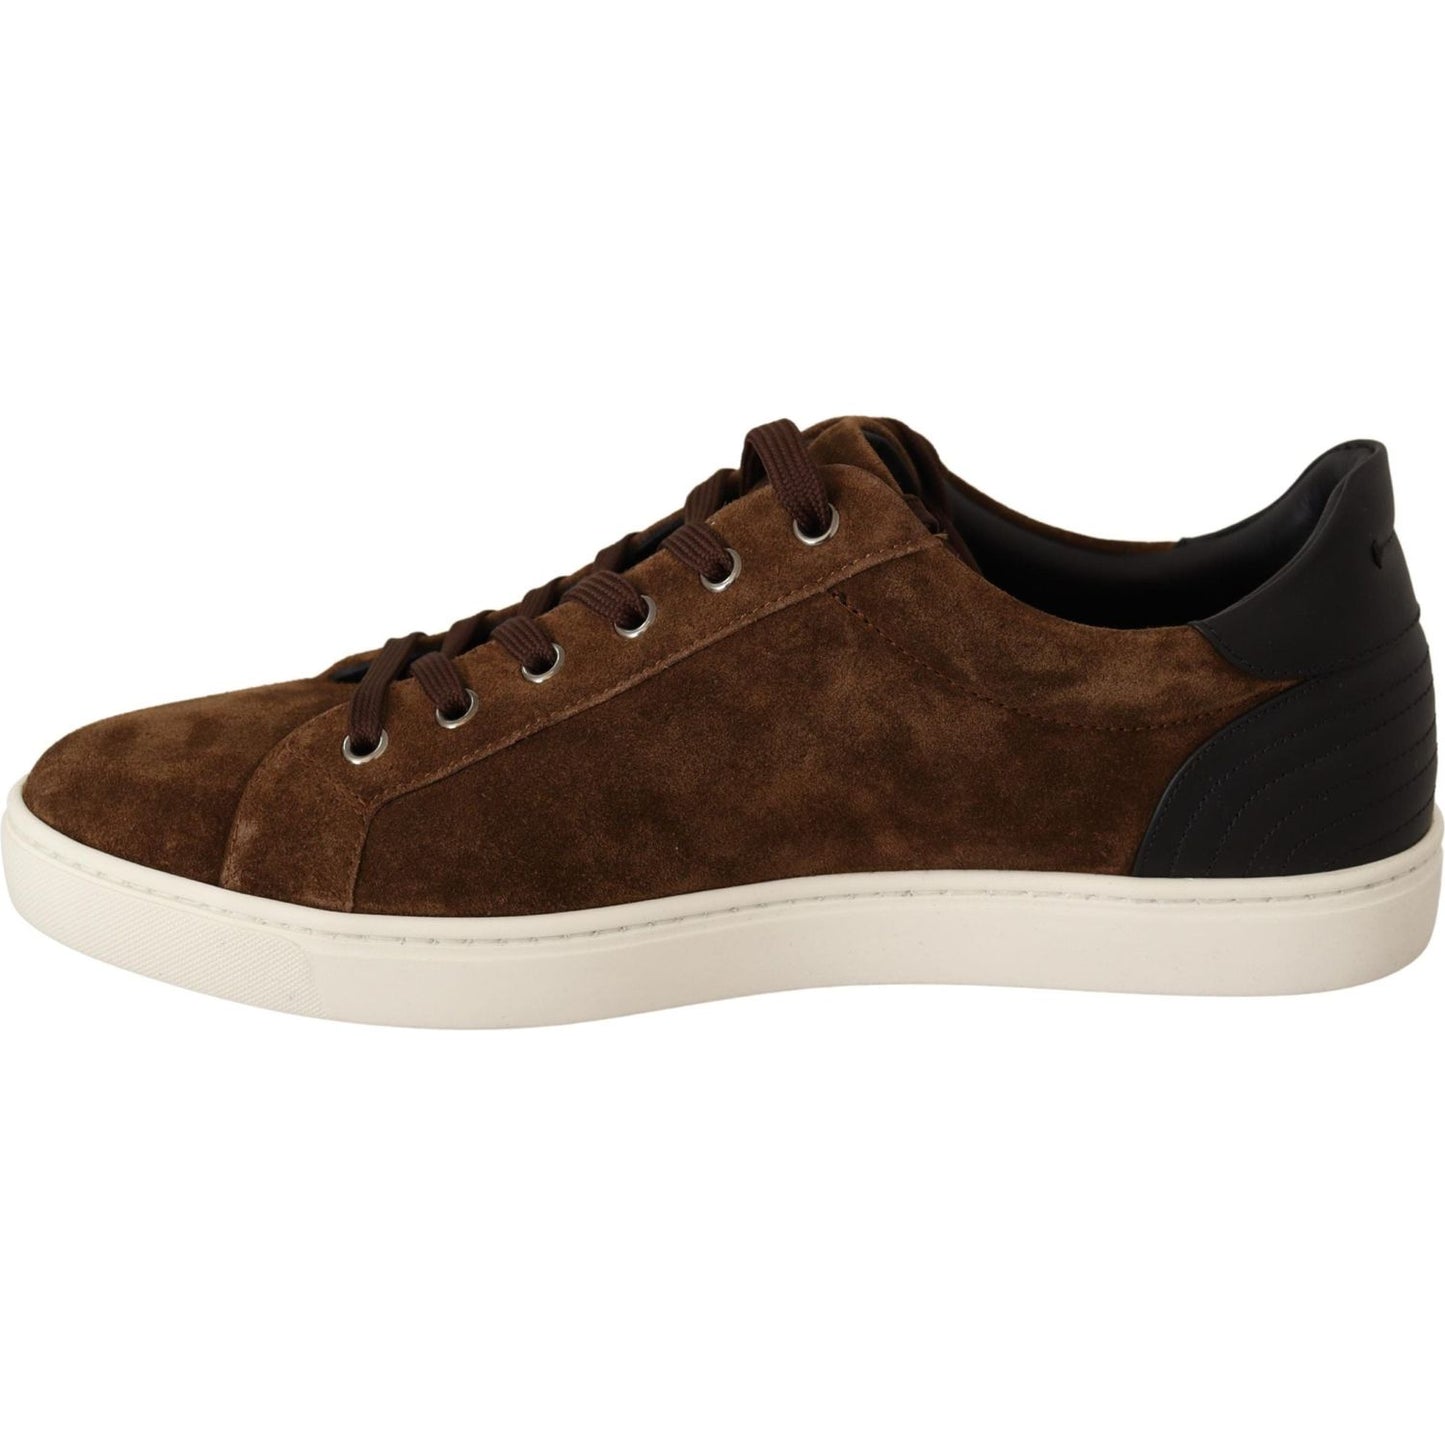 Dolce & Gabbana Elegant Leather Casual Sneakers in Brown brown-suede-leather-mens-low-tops-sneakers IMG_4822-scaled-73221dad-27d.jpg